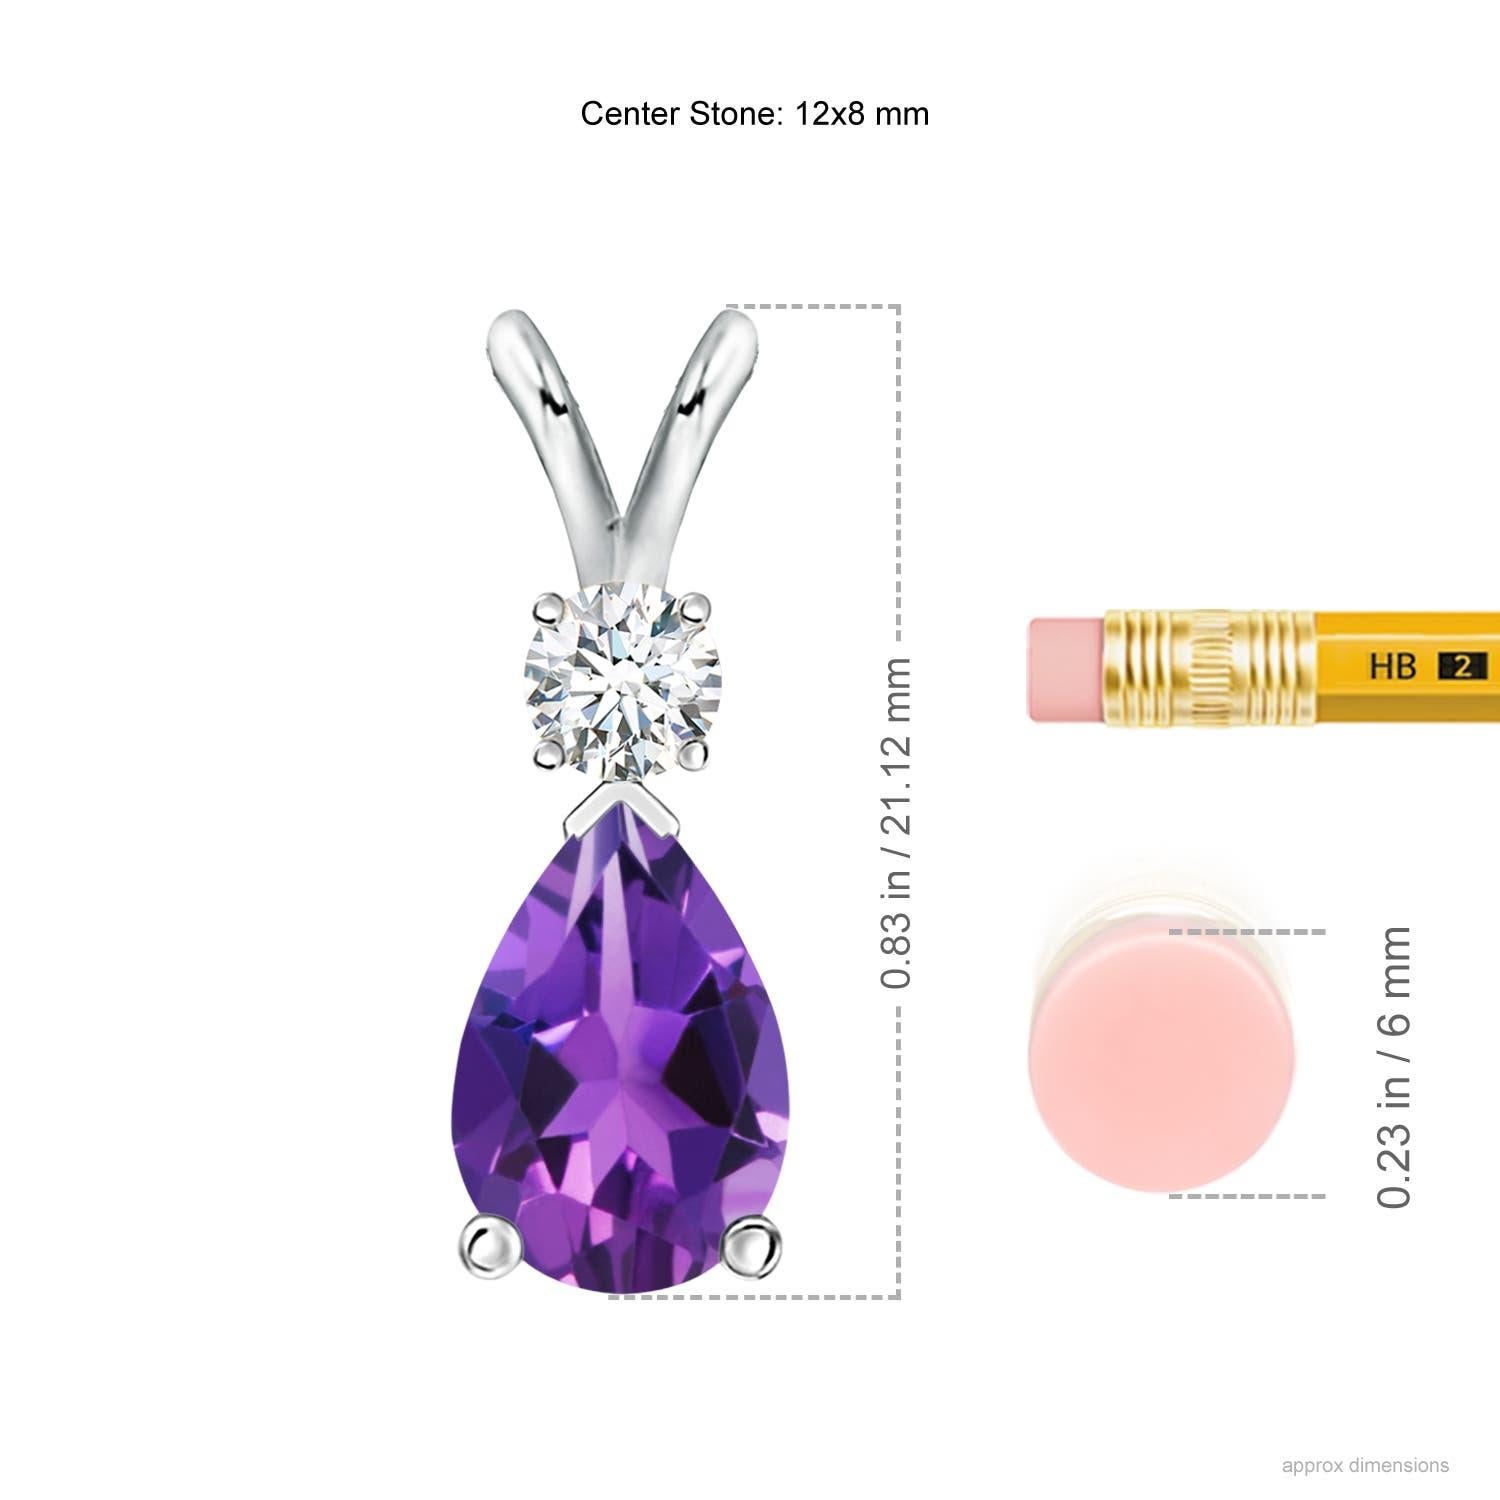 A pear-shaped deep purple amethyst is secured in a prong setting and embellished with a diamond accent on the top. Simple yet stunning, this teardrop amethyst pendant with V bale is sculpted in 14k white gold.